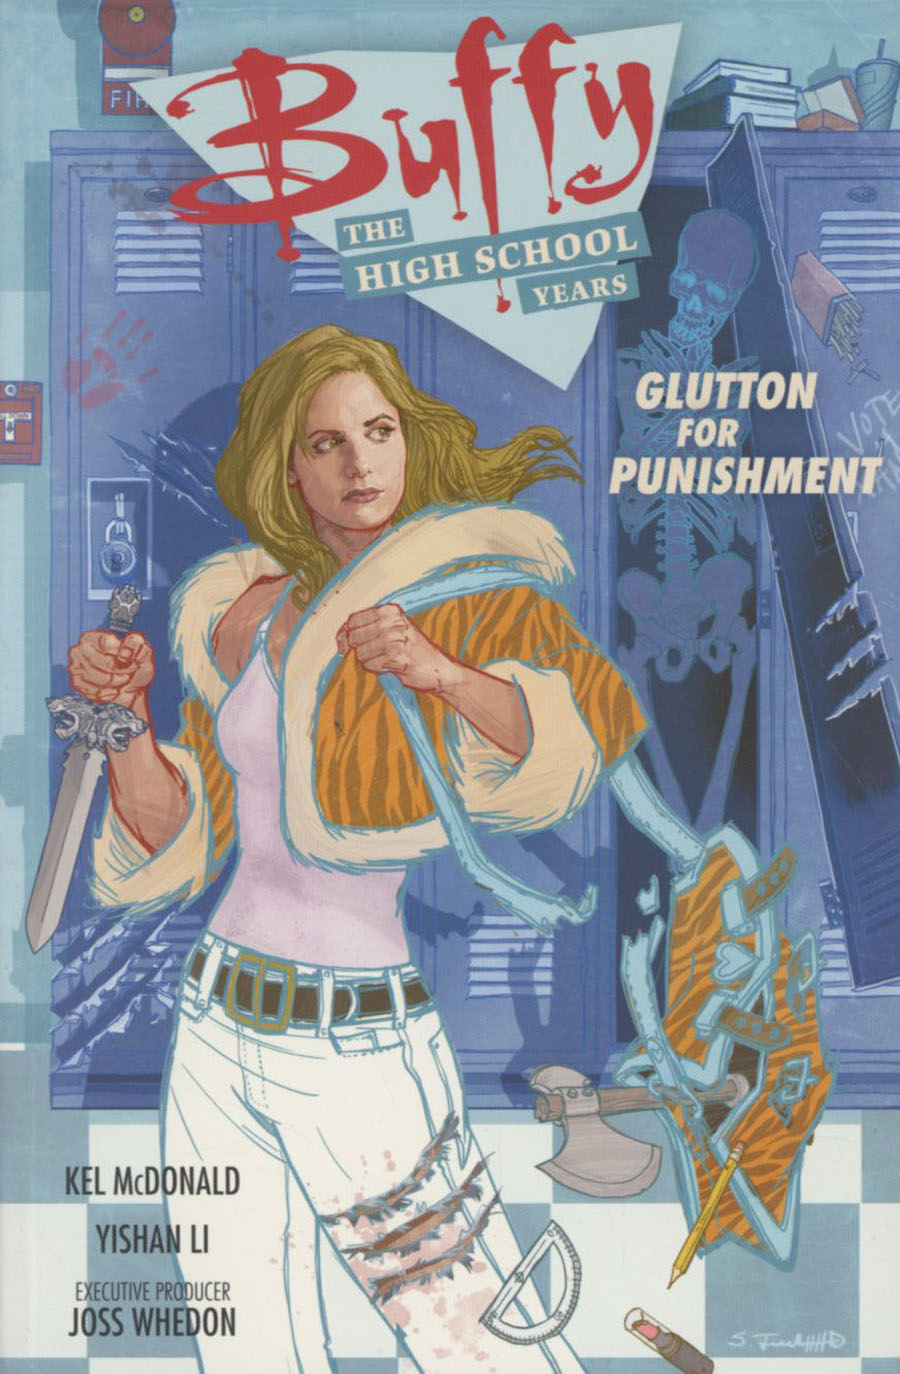 Buffy The High School Years Glutton For Punishment TP